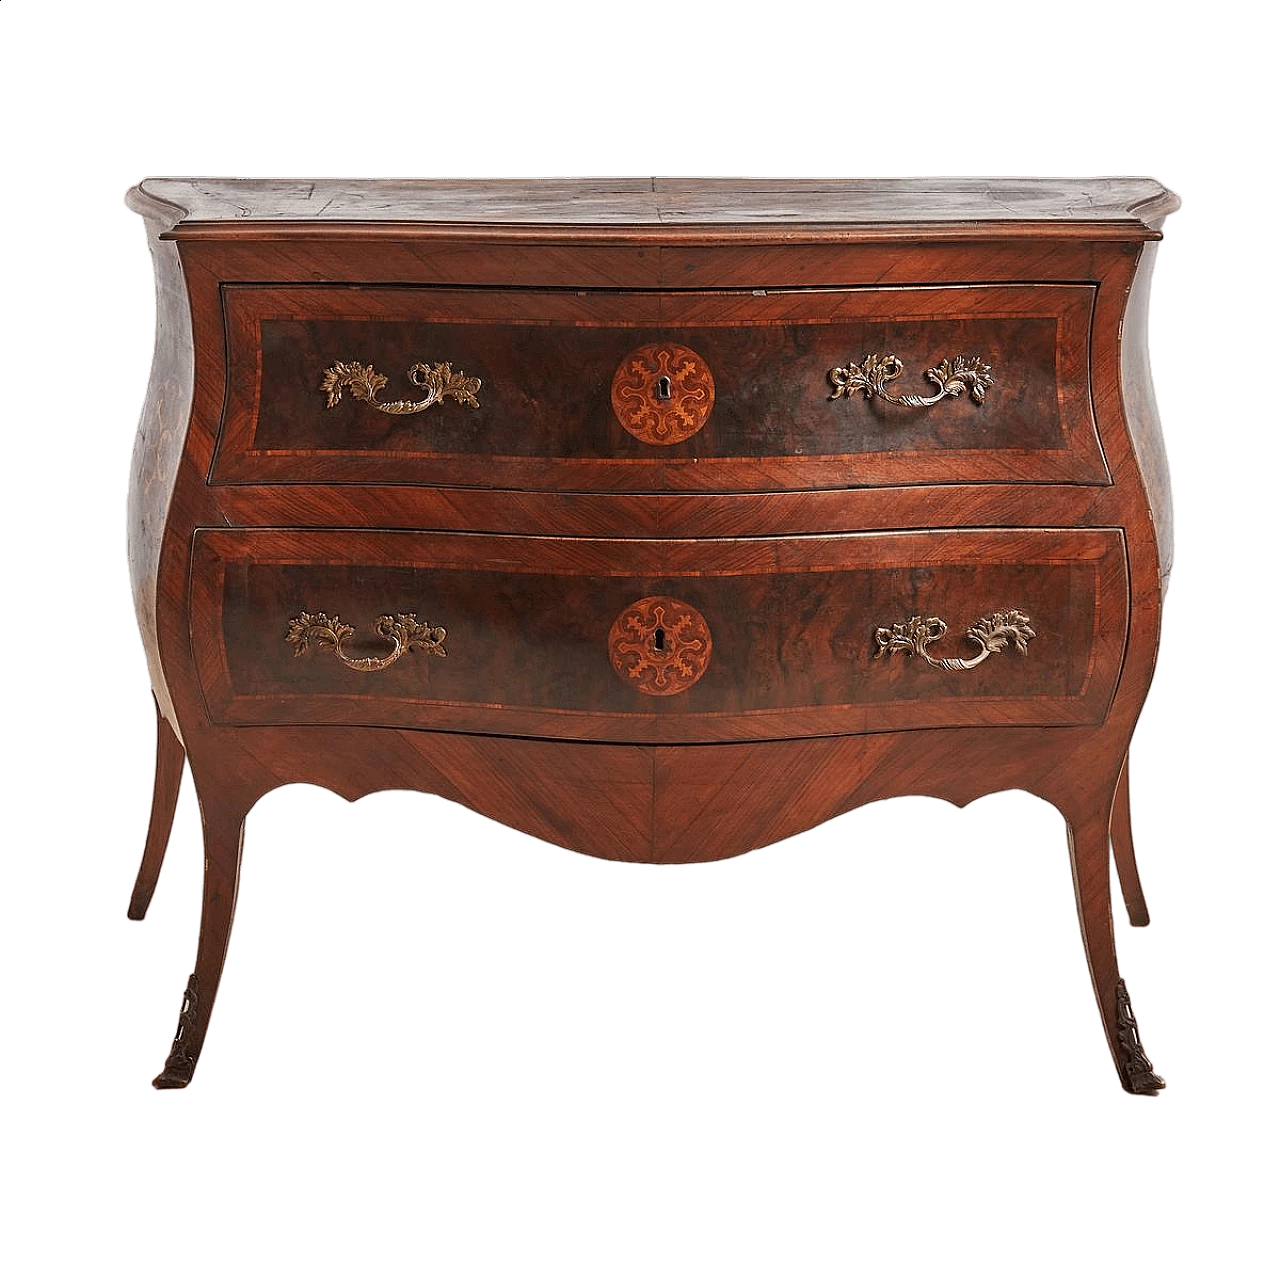 Two-drawer wooden moved dresser with inlay decoration, 19th century 10